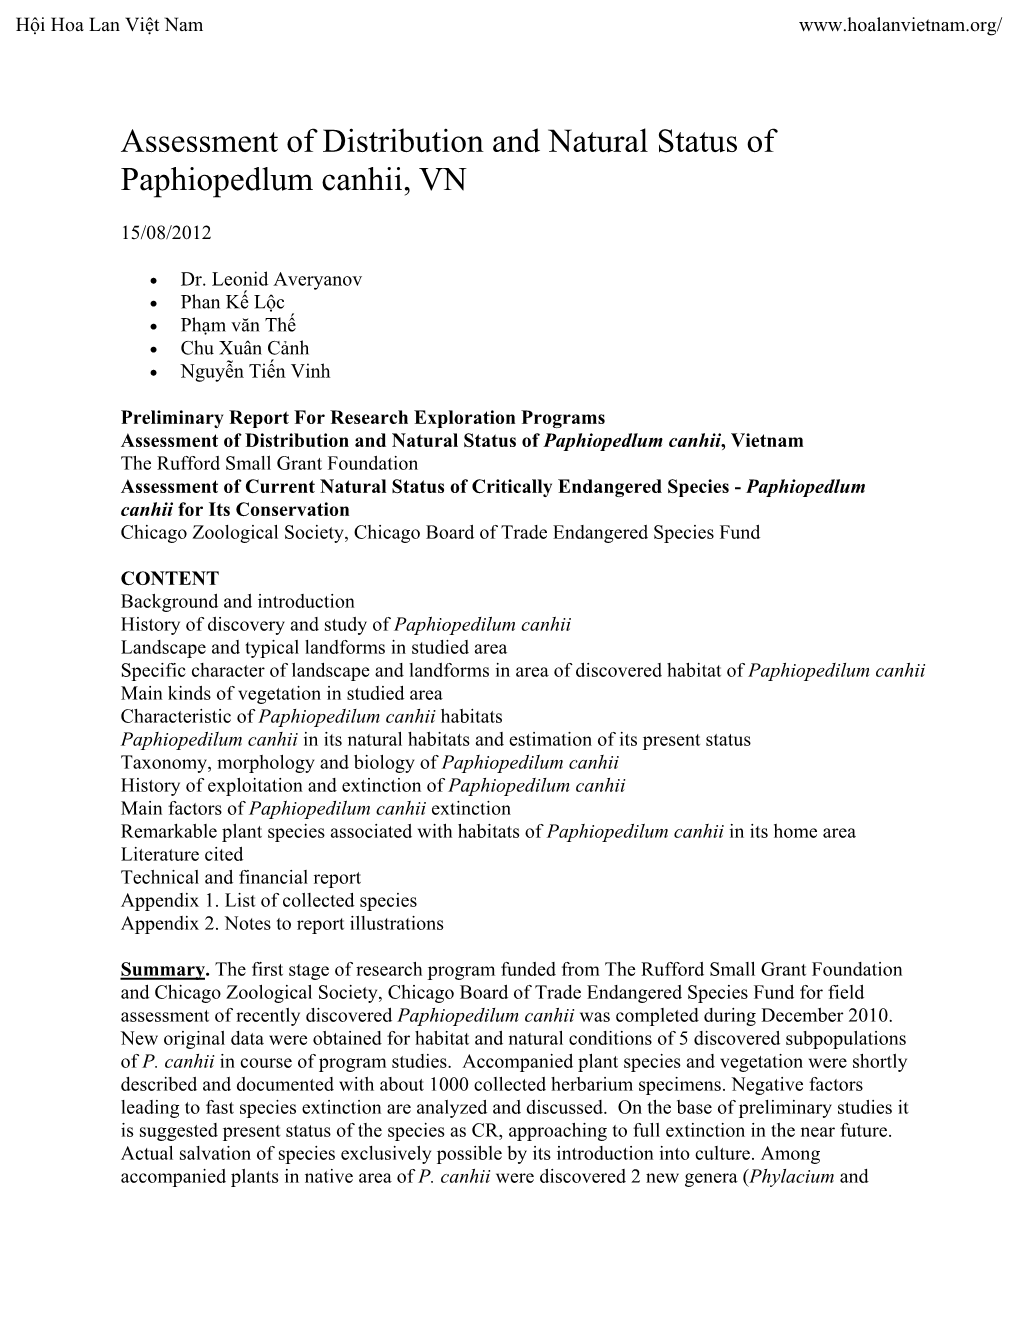 Assessment of Distribution and Natural Status of Paphiopedlum Canhii, VN